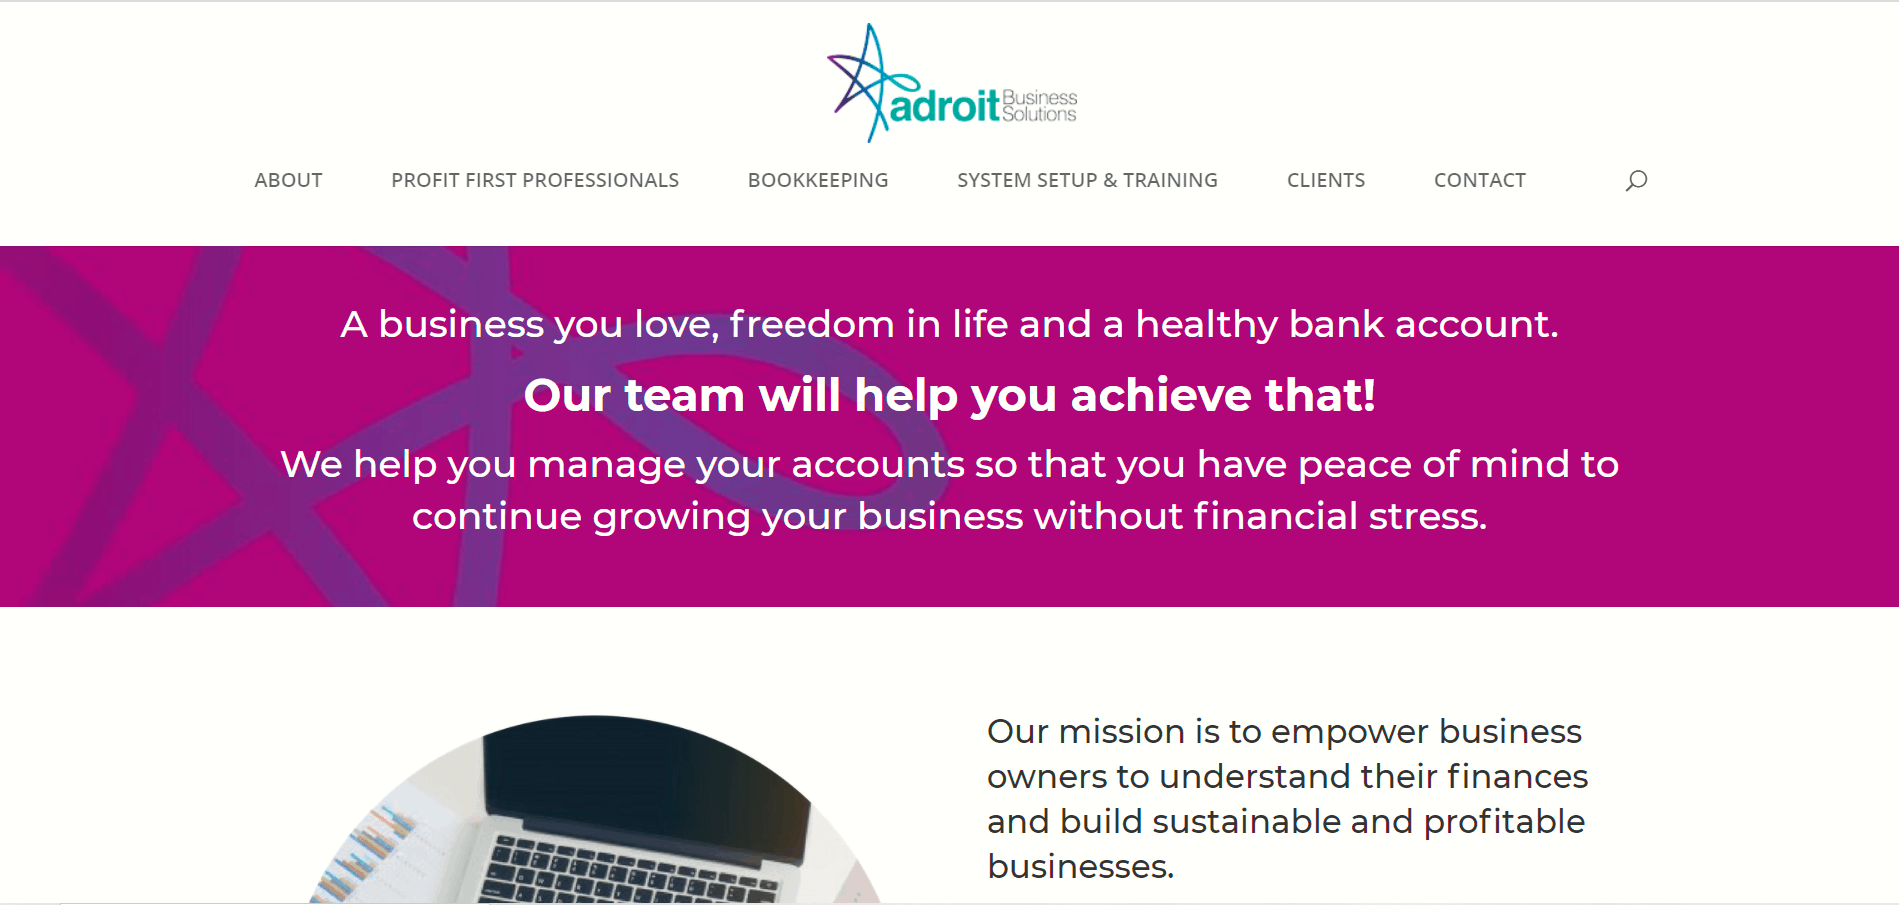 Adroit Business Solutions